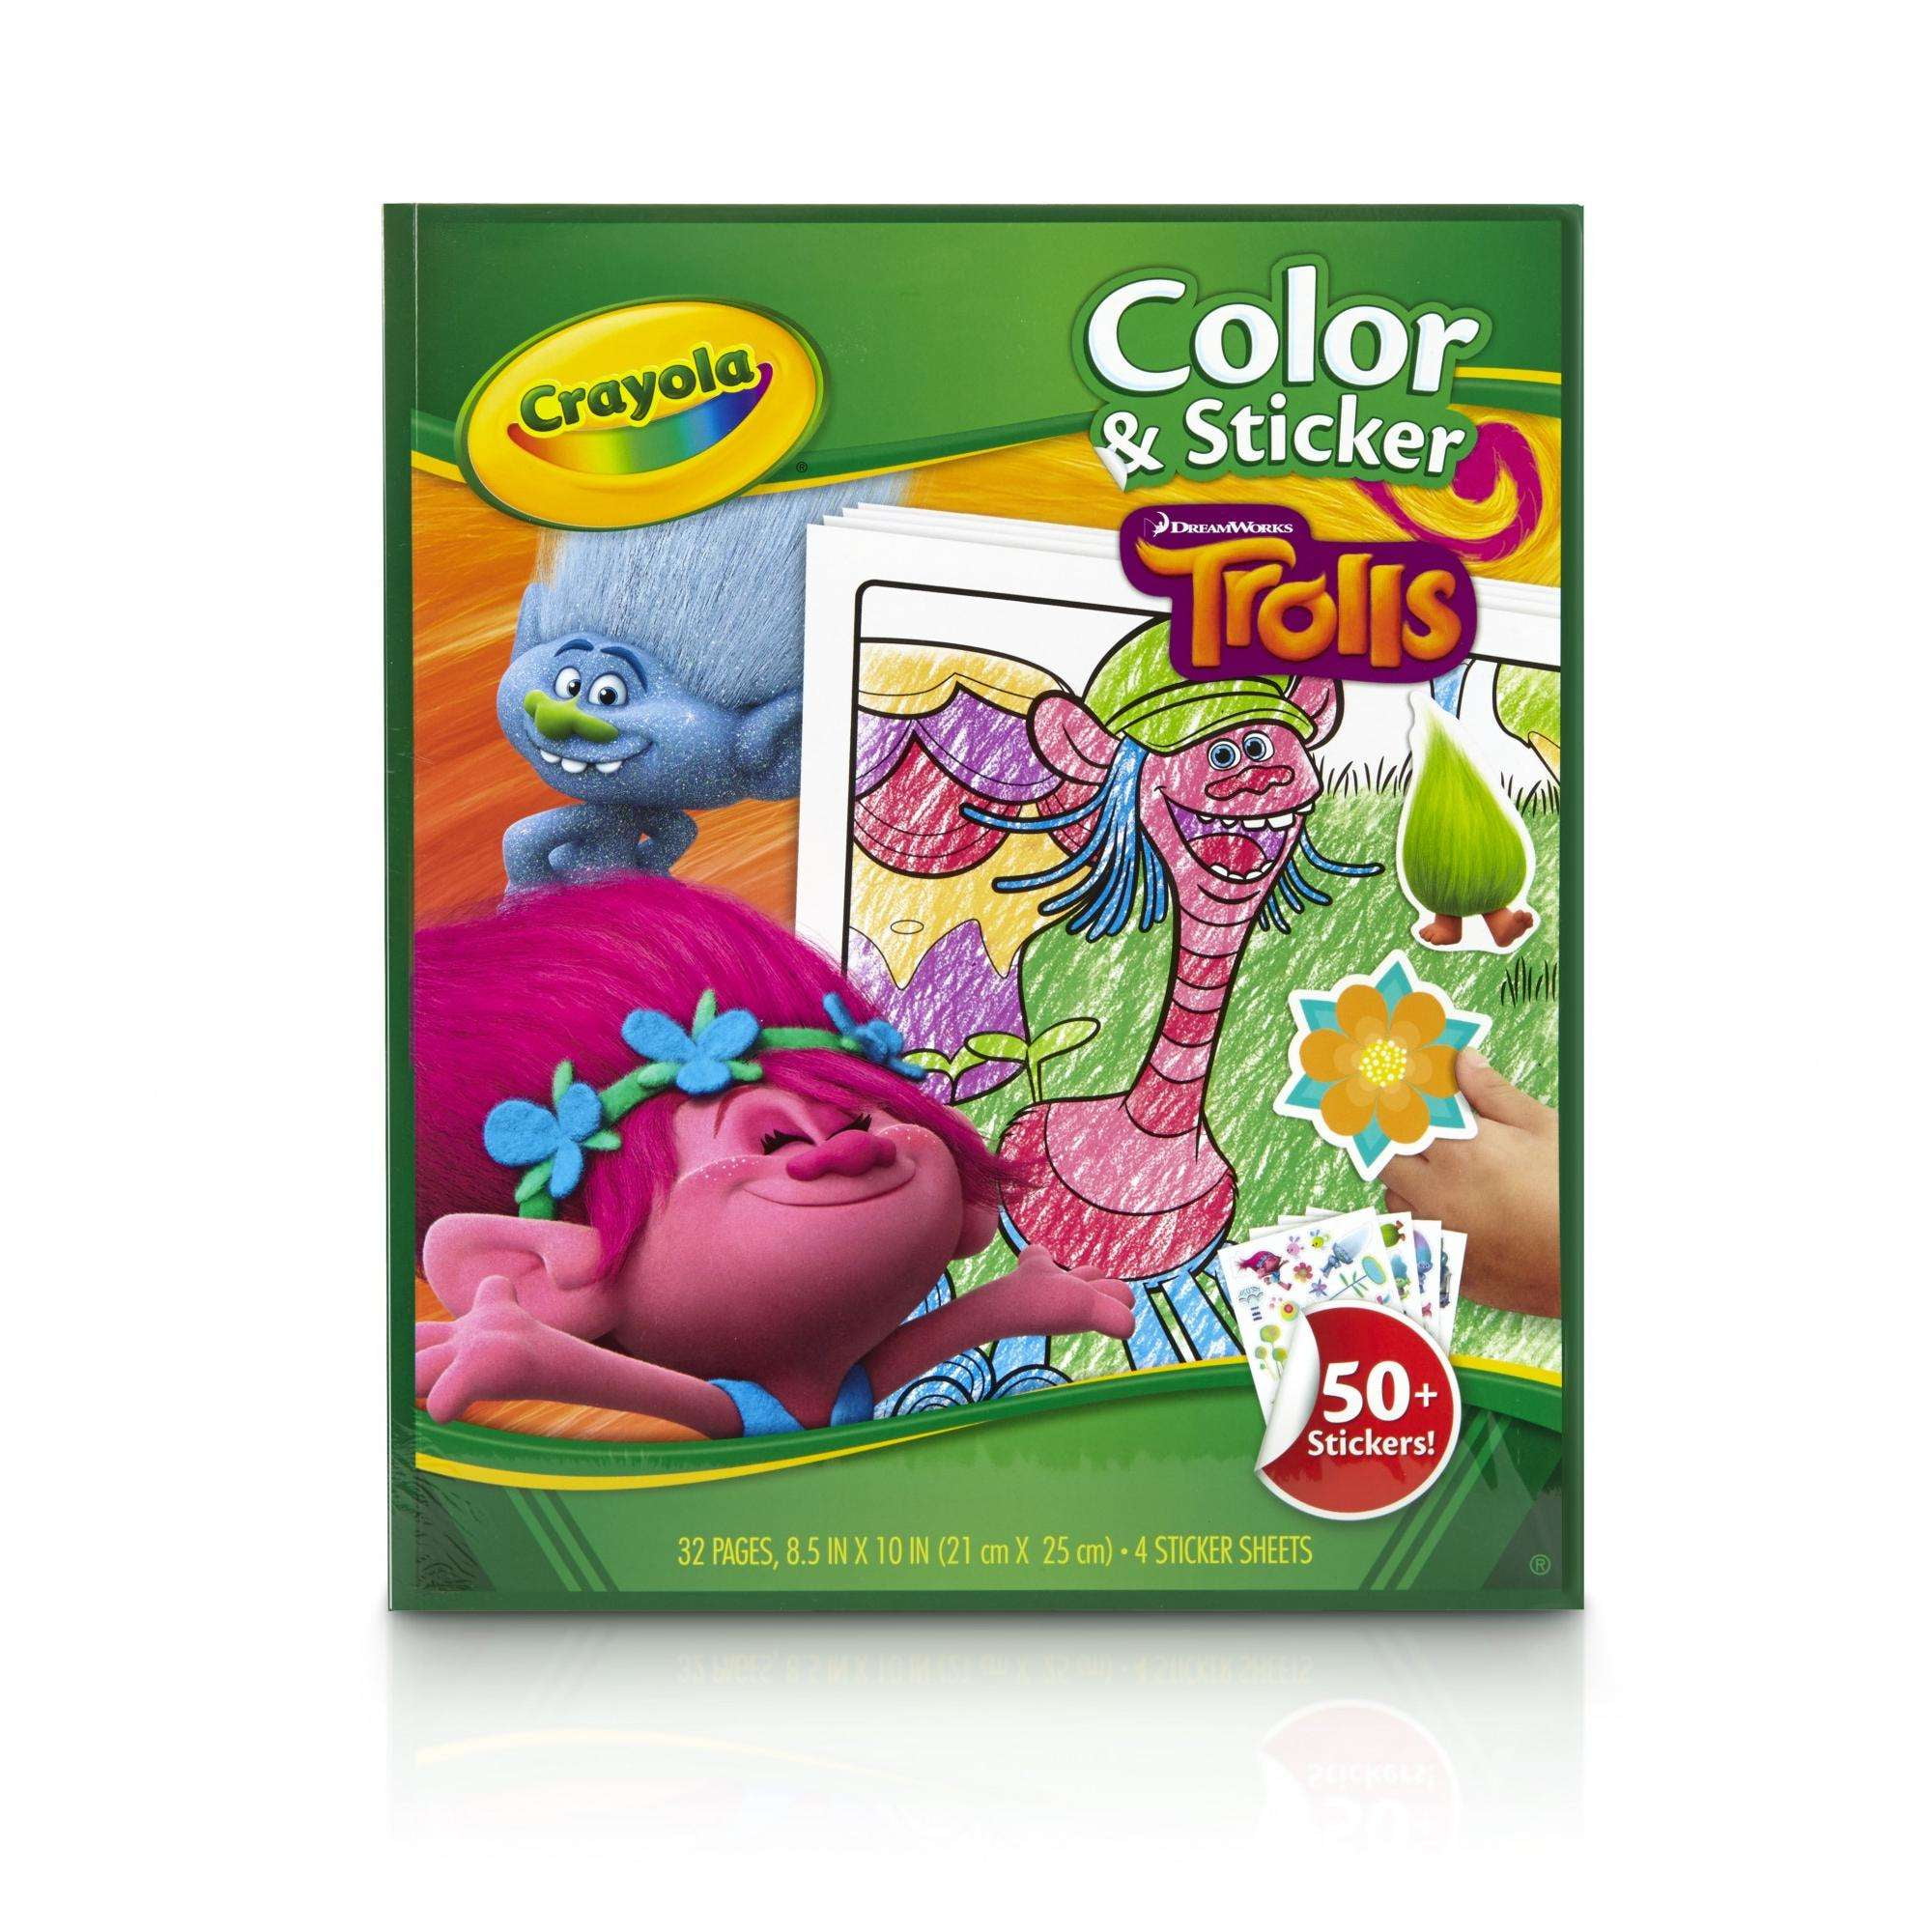 Crayola Trolls Colour and Sticker Book 32 pages 50+stickers-Freepost 